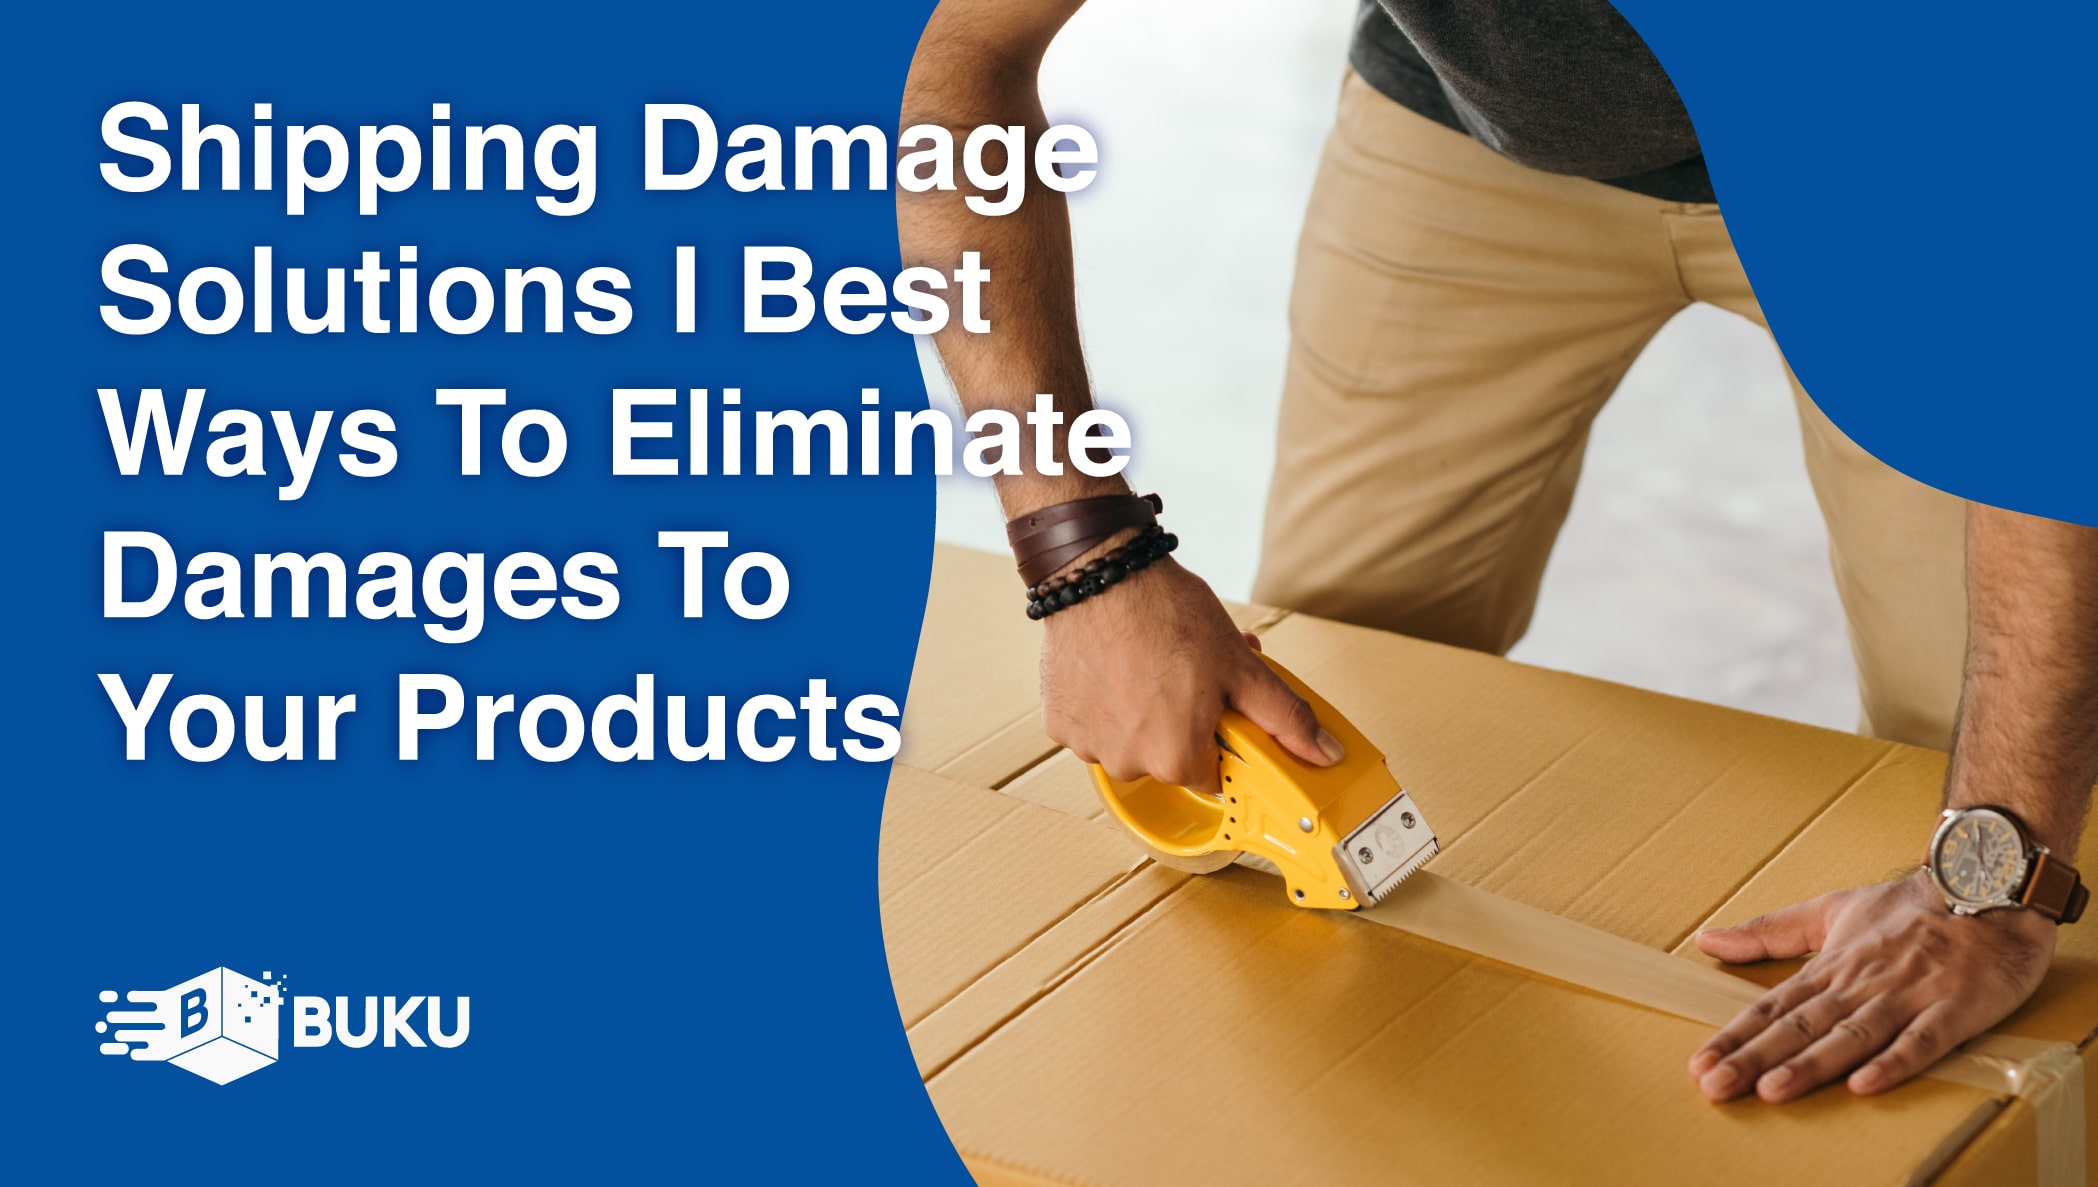 Shipping Damage Solutions | Best Ways To Eliminate Damages To Your Products